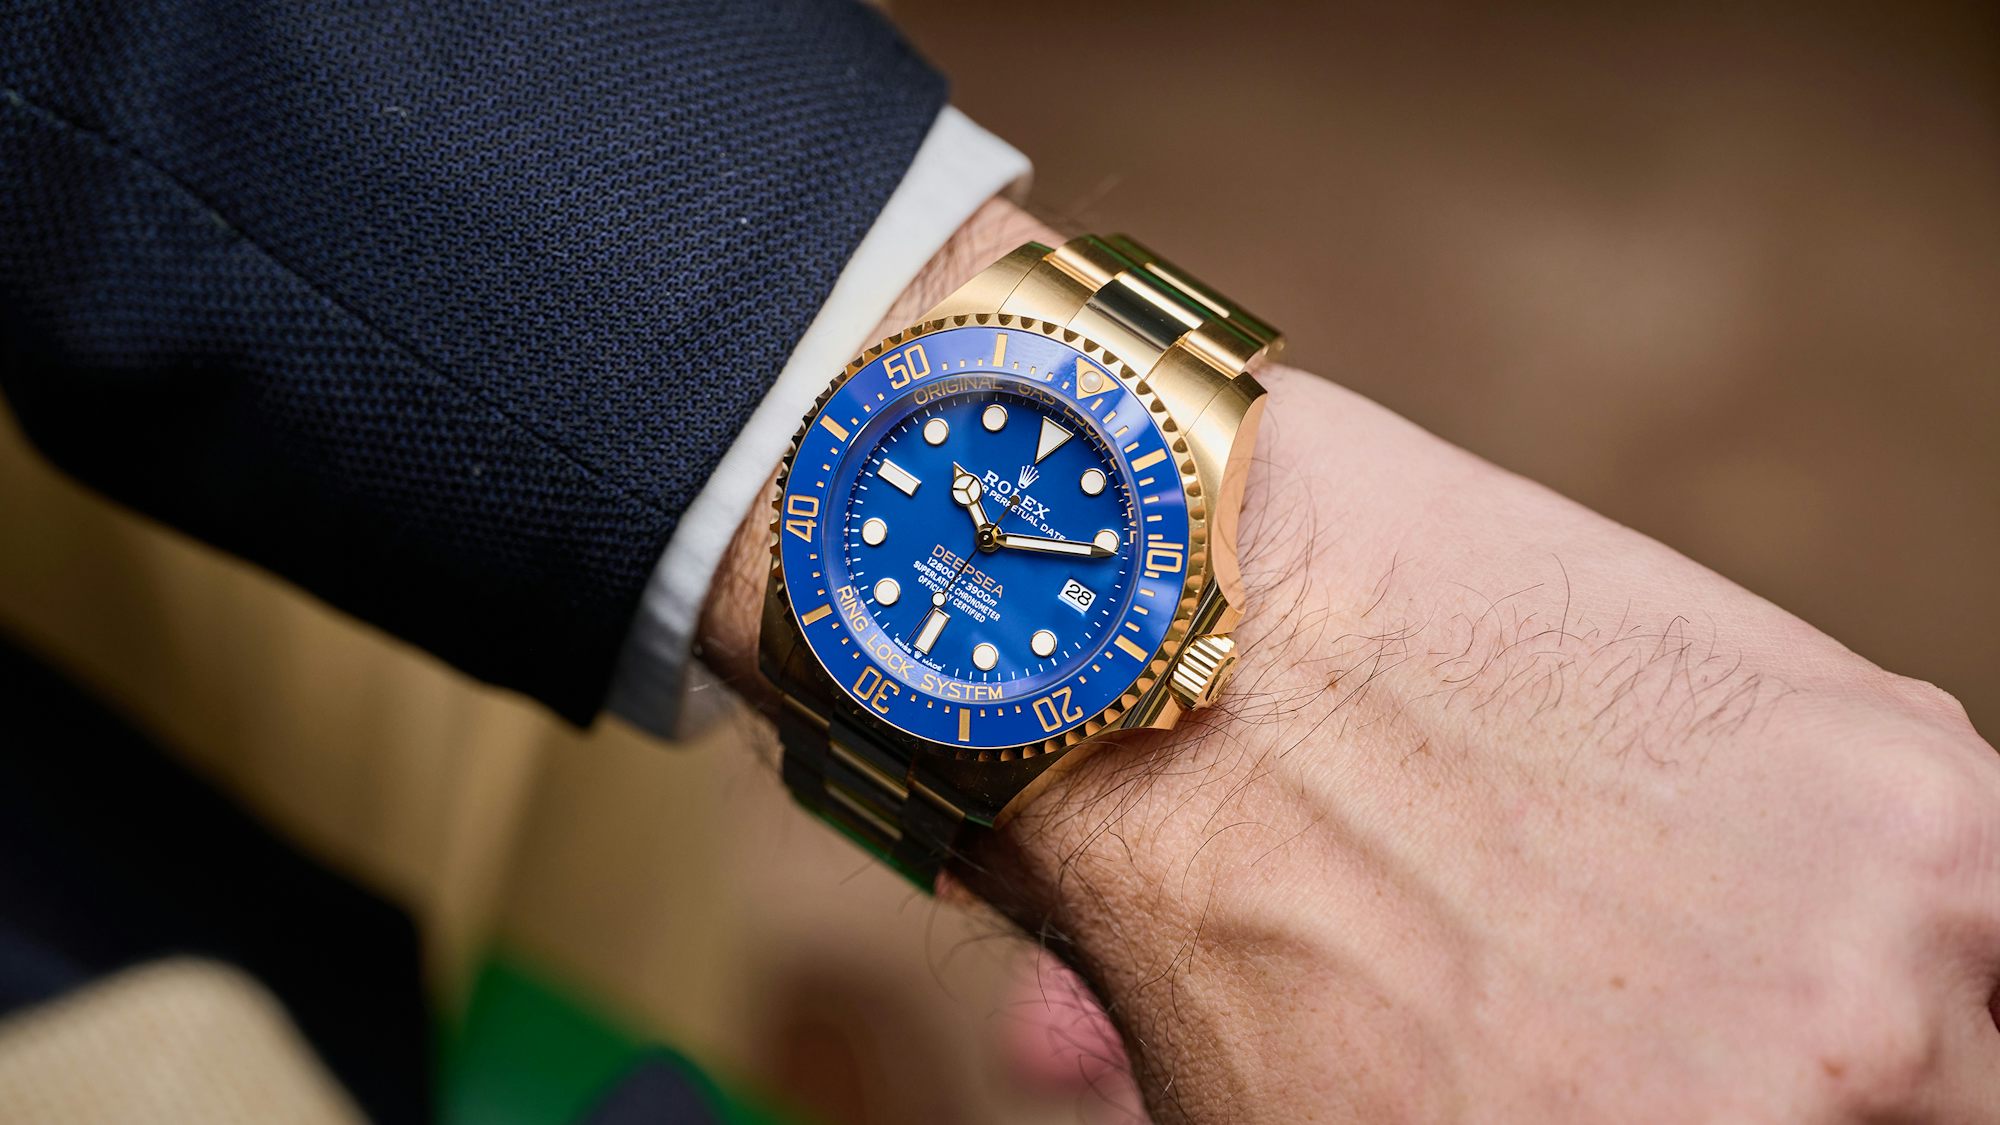 Hands-On: Sure, Nobody Asked For A (Nearly) Solid-Gold Rolex Deepsea. Yes, It's Ridiculous. But I Sure Ain't Mad They Made One.